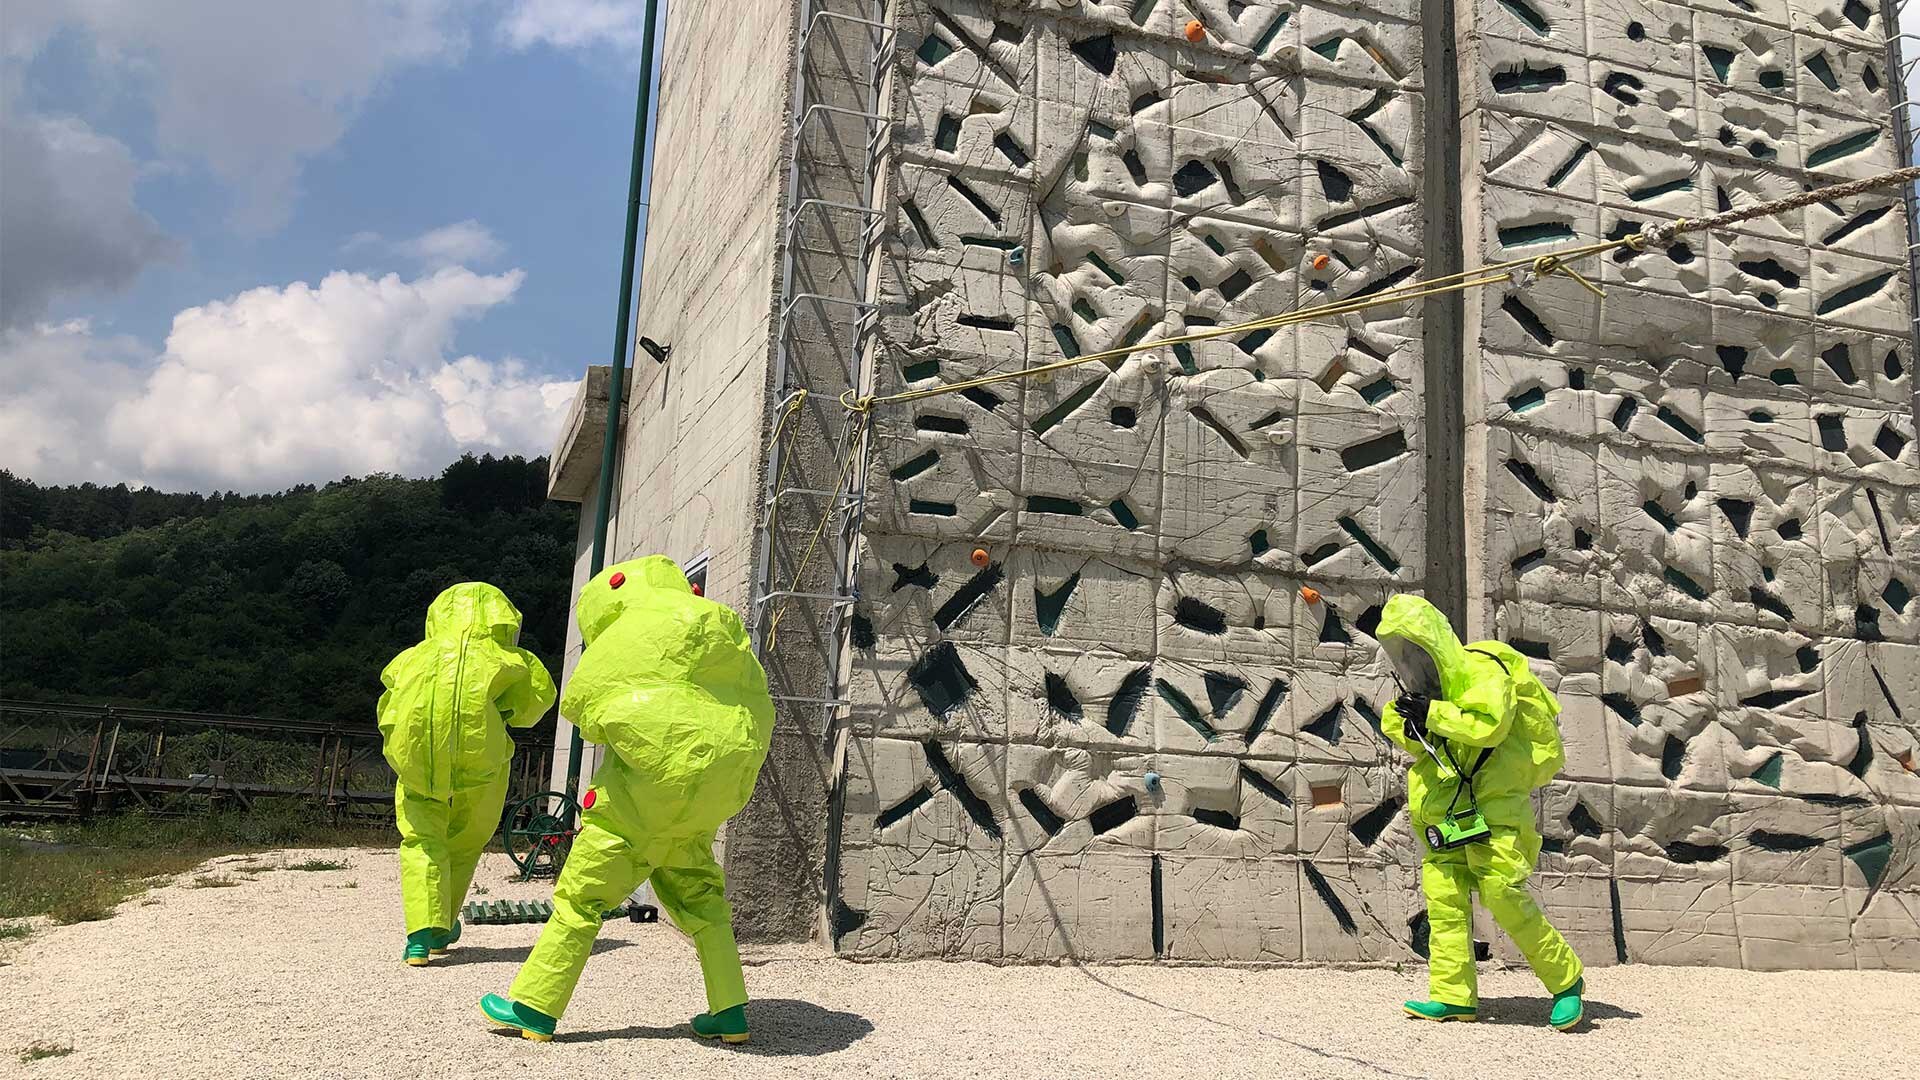 he Defense Threat Reduction Agency partnered with the Government of Kosovo to train and equip Kosovo Security Forces (KSF) personnel to effectively prepare for and respond to Chemical, Biological, Radiological, and Nuclear (CBRN) events